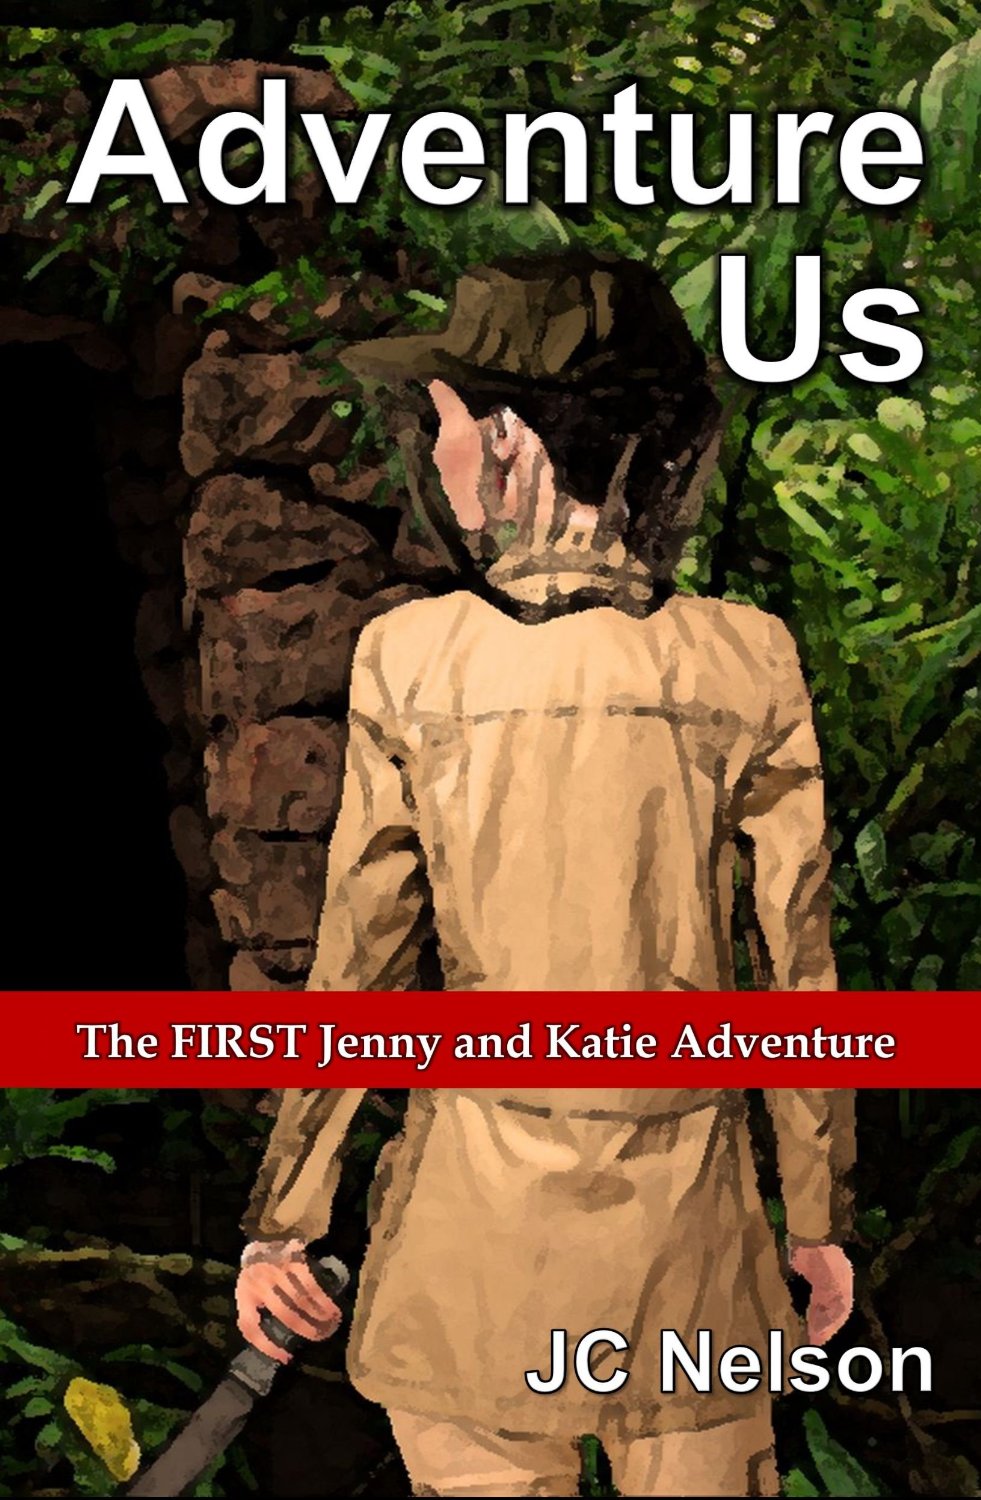 Adventure Us by JC Nelson